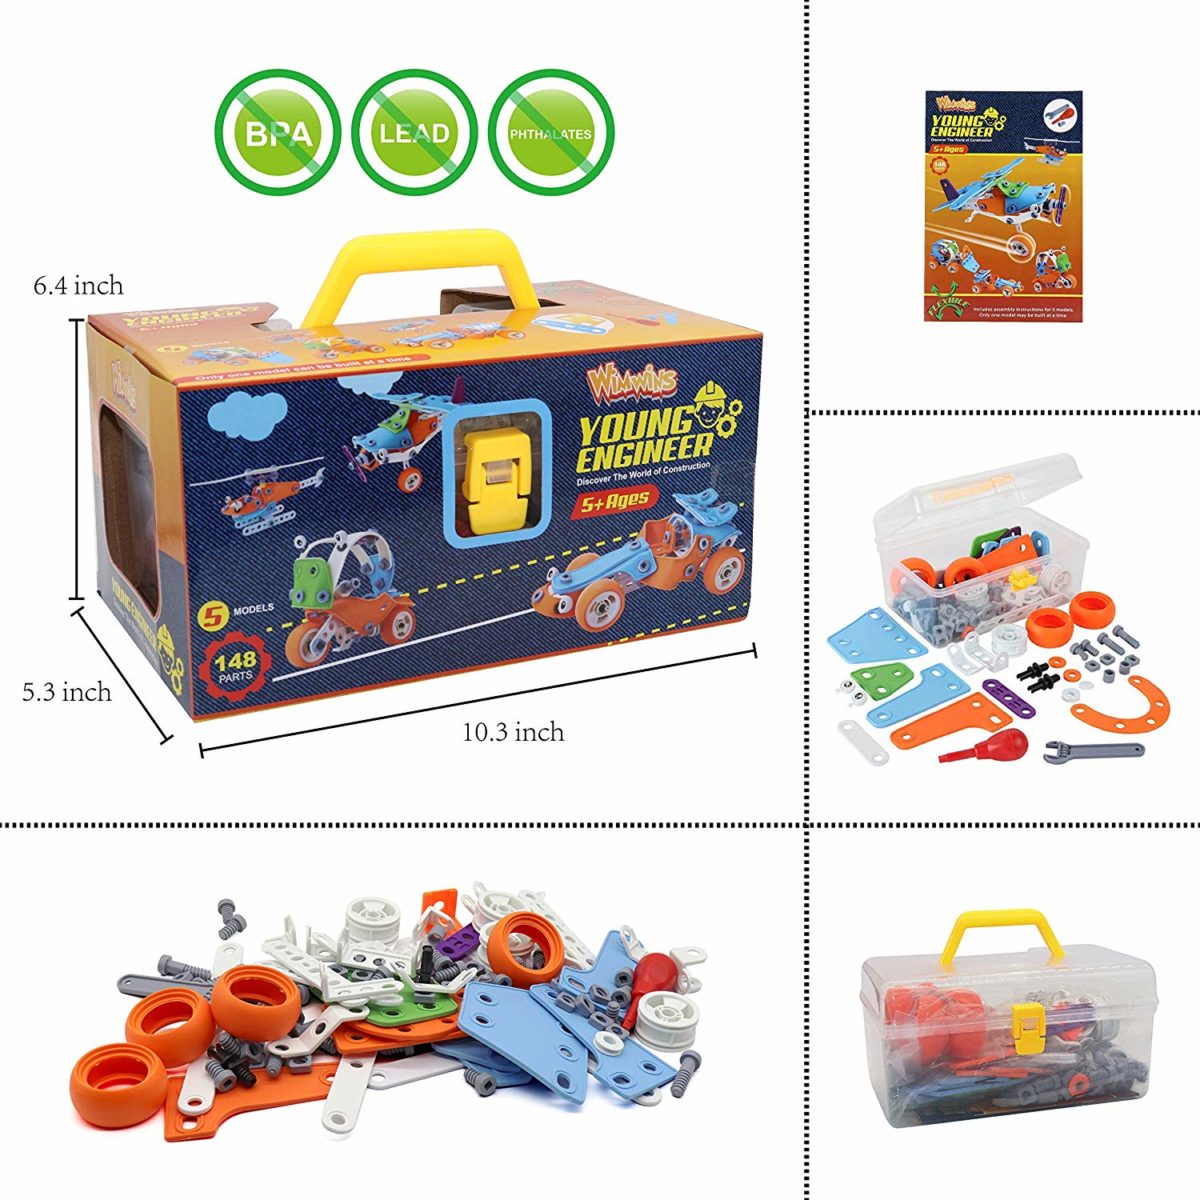 STEM Building Set for Boys - Top Toys and Gifts for Six Year Old Boys 2